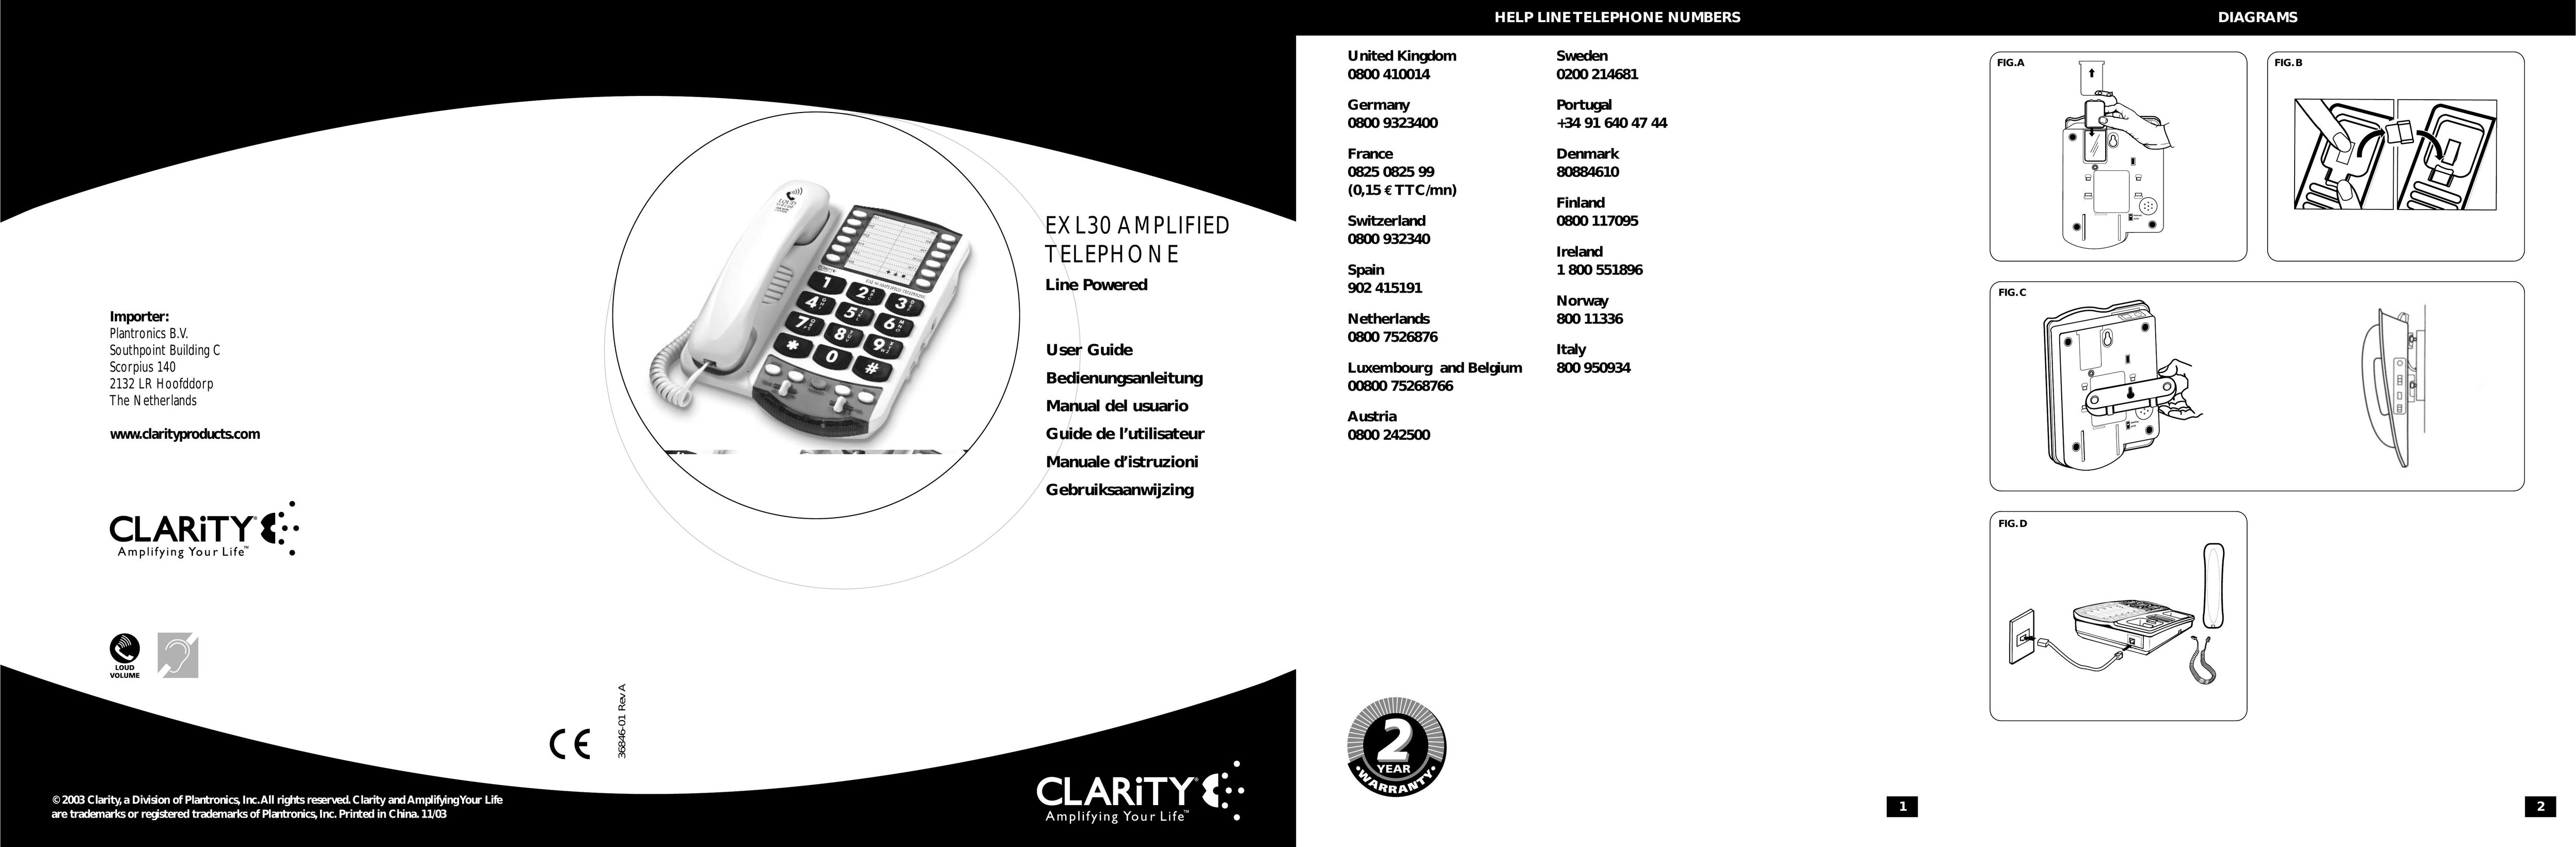 Clarity EXL30 Amplified Phone User Manual (Page 1)